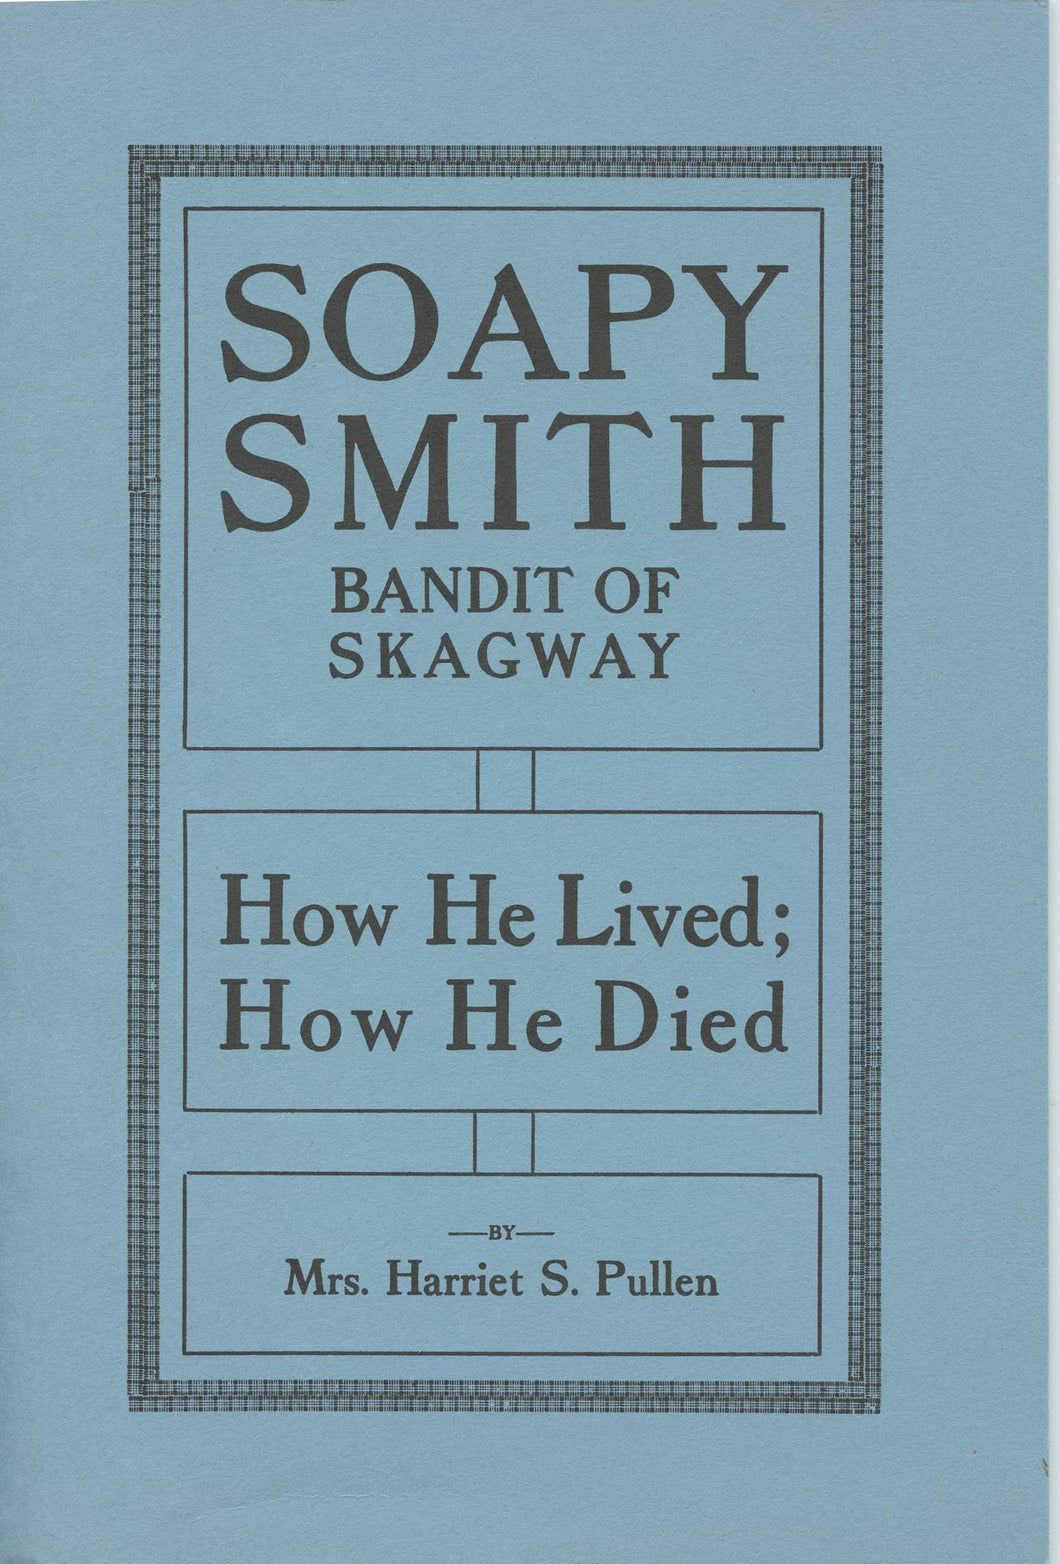 Soapy Smith: Bandit of Skagway. How He Lived; How He Died